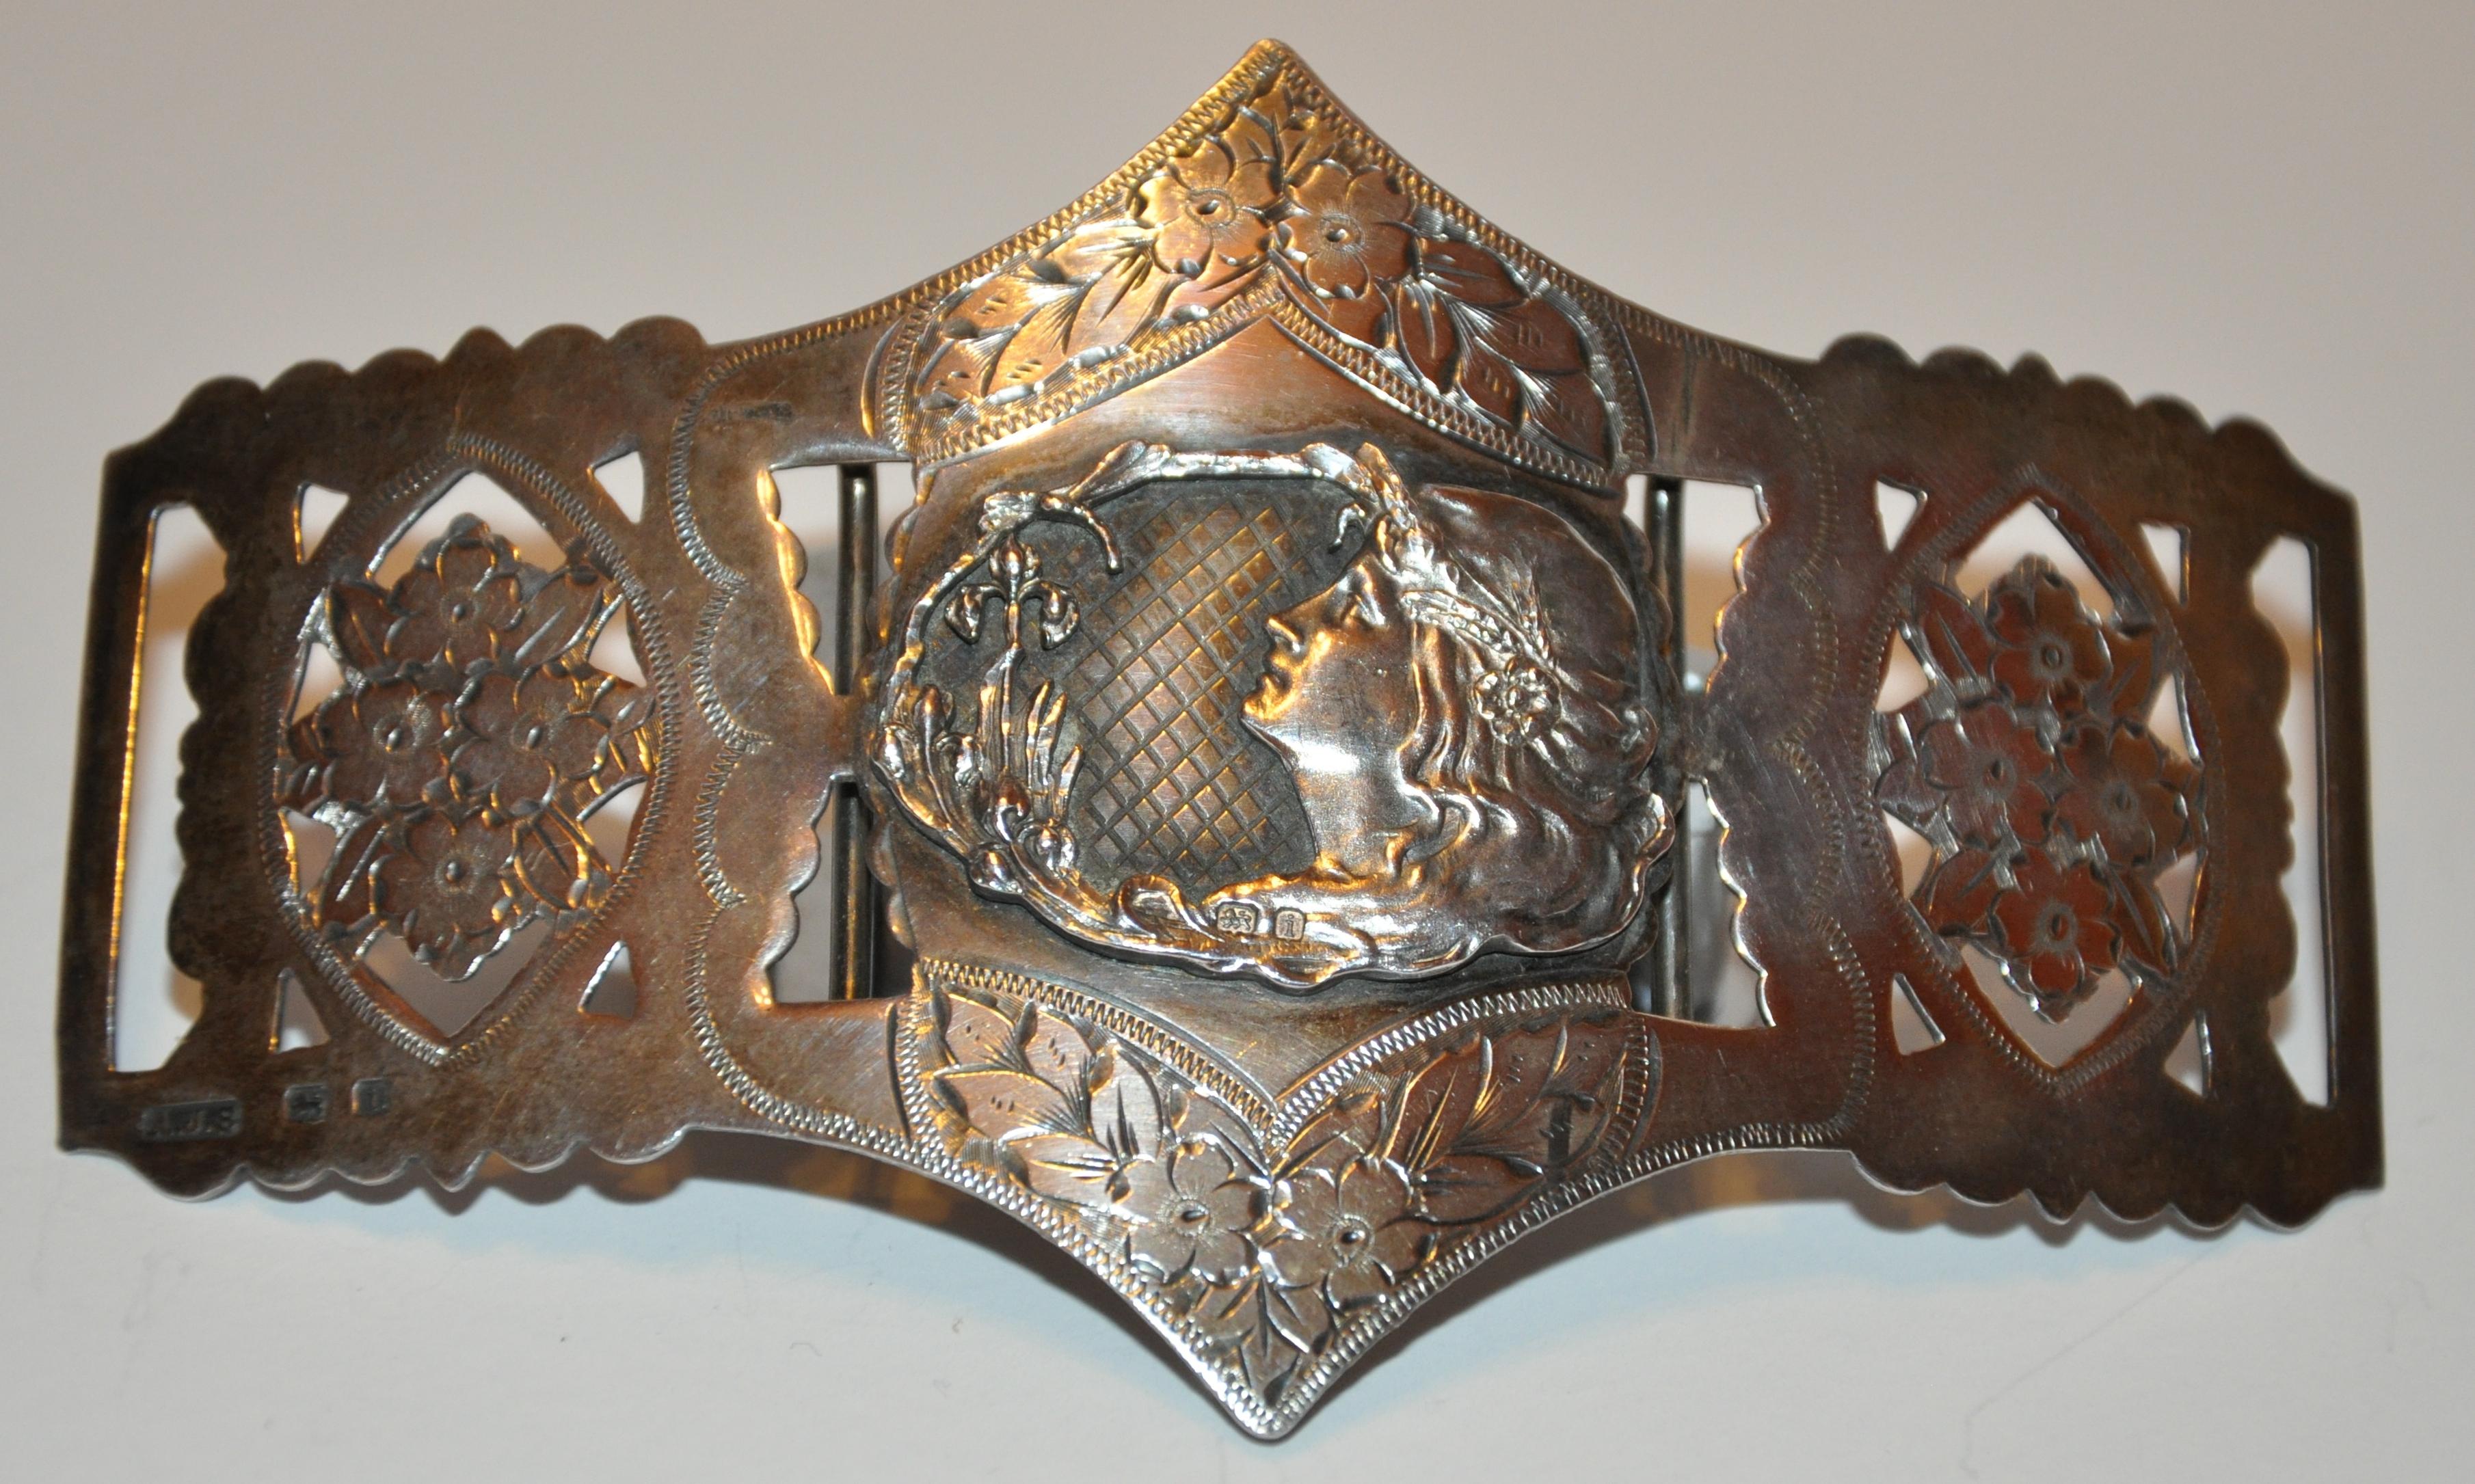          Magnificently detailed, this 3-piece Victorian-era etched Silver buckle of beautiful florals on all three pieces highlights the center buckle with inlaid 